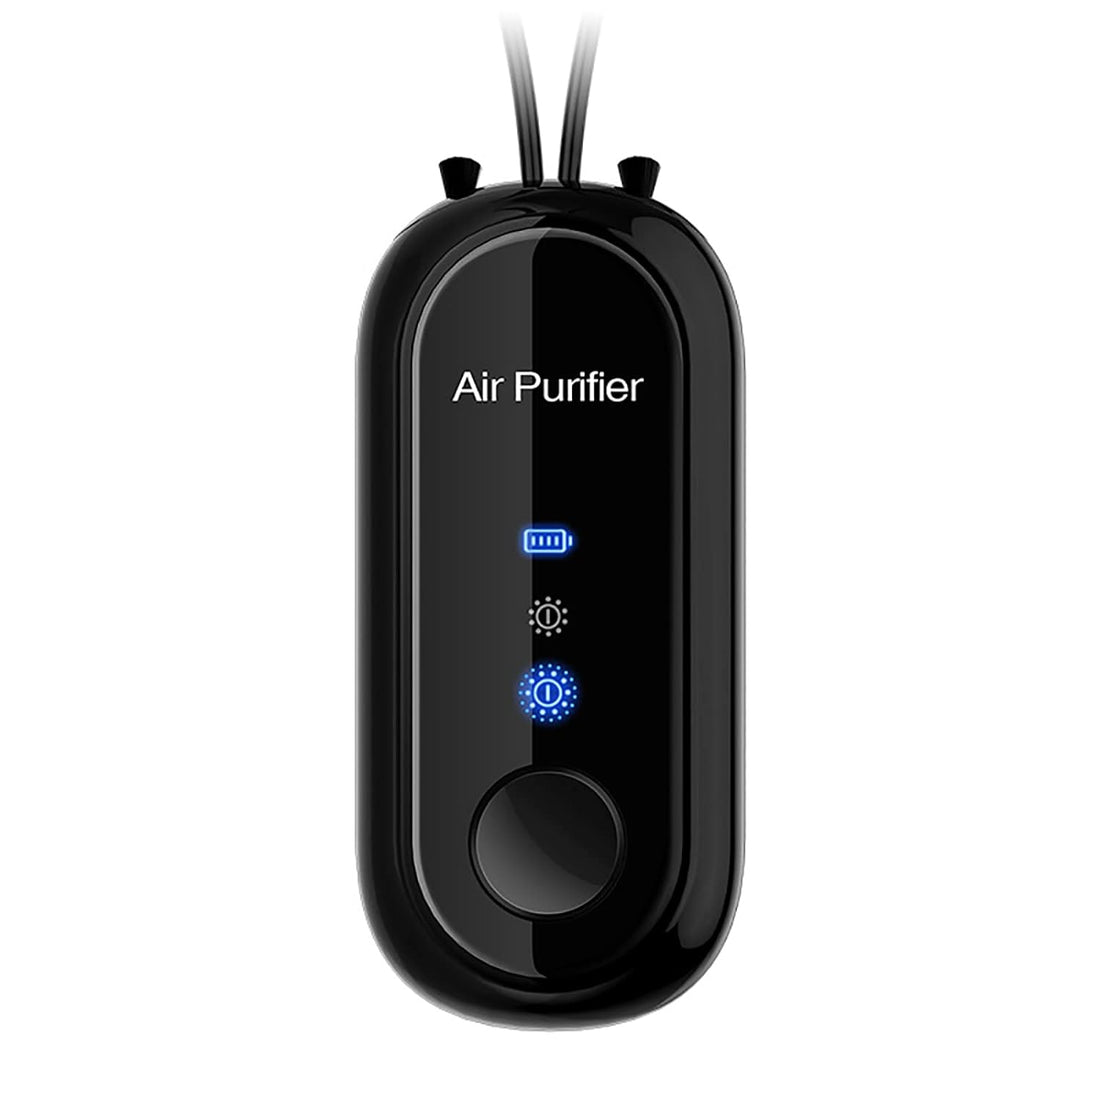 Personal hanging neck air purifier, portable mini negative ion air generator, rechargeable with USB, can purify tiny particles, pollen, smoke in the air, without filter(Color:Black)